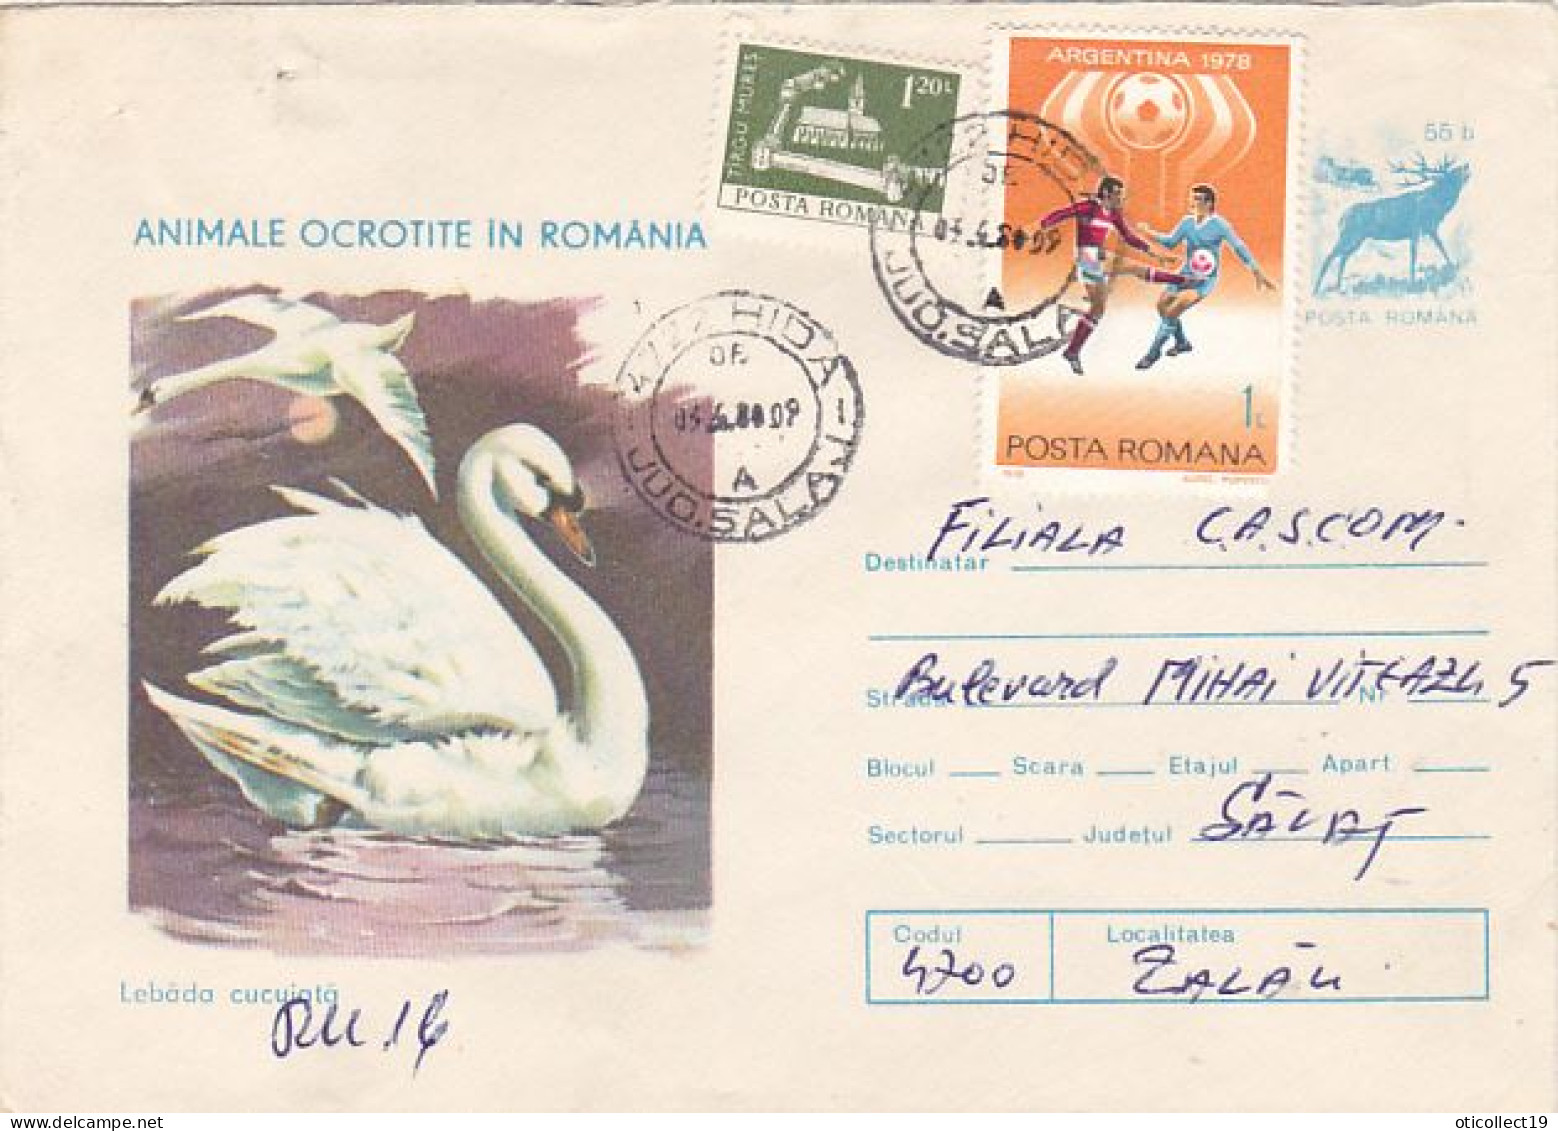 ANIMALS, BIRDS, MUTE SWAN, REGISTERED COVER STATIONERY, FINE STAMPS, 1977, ROMANIA - Cygnes